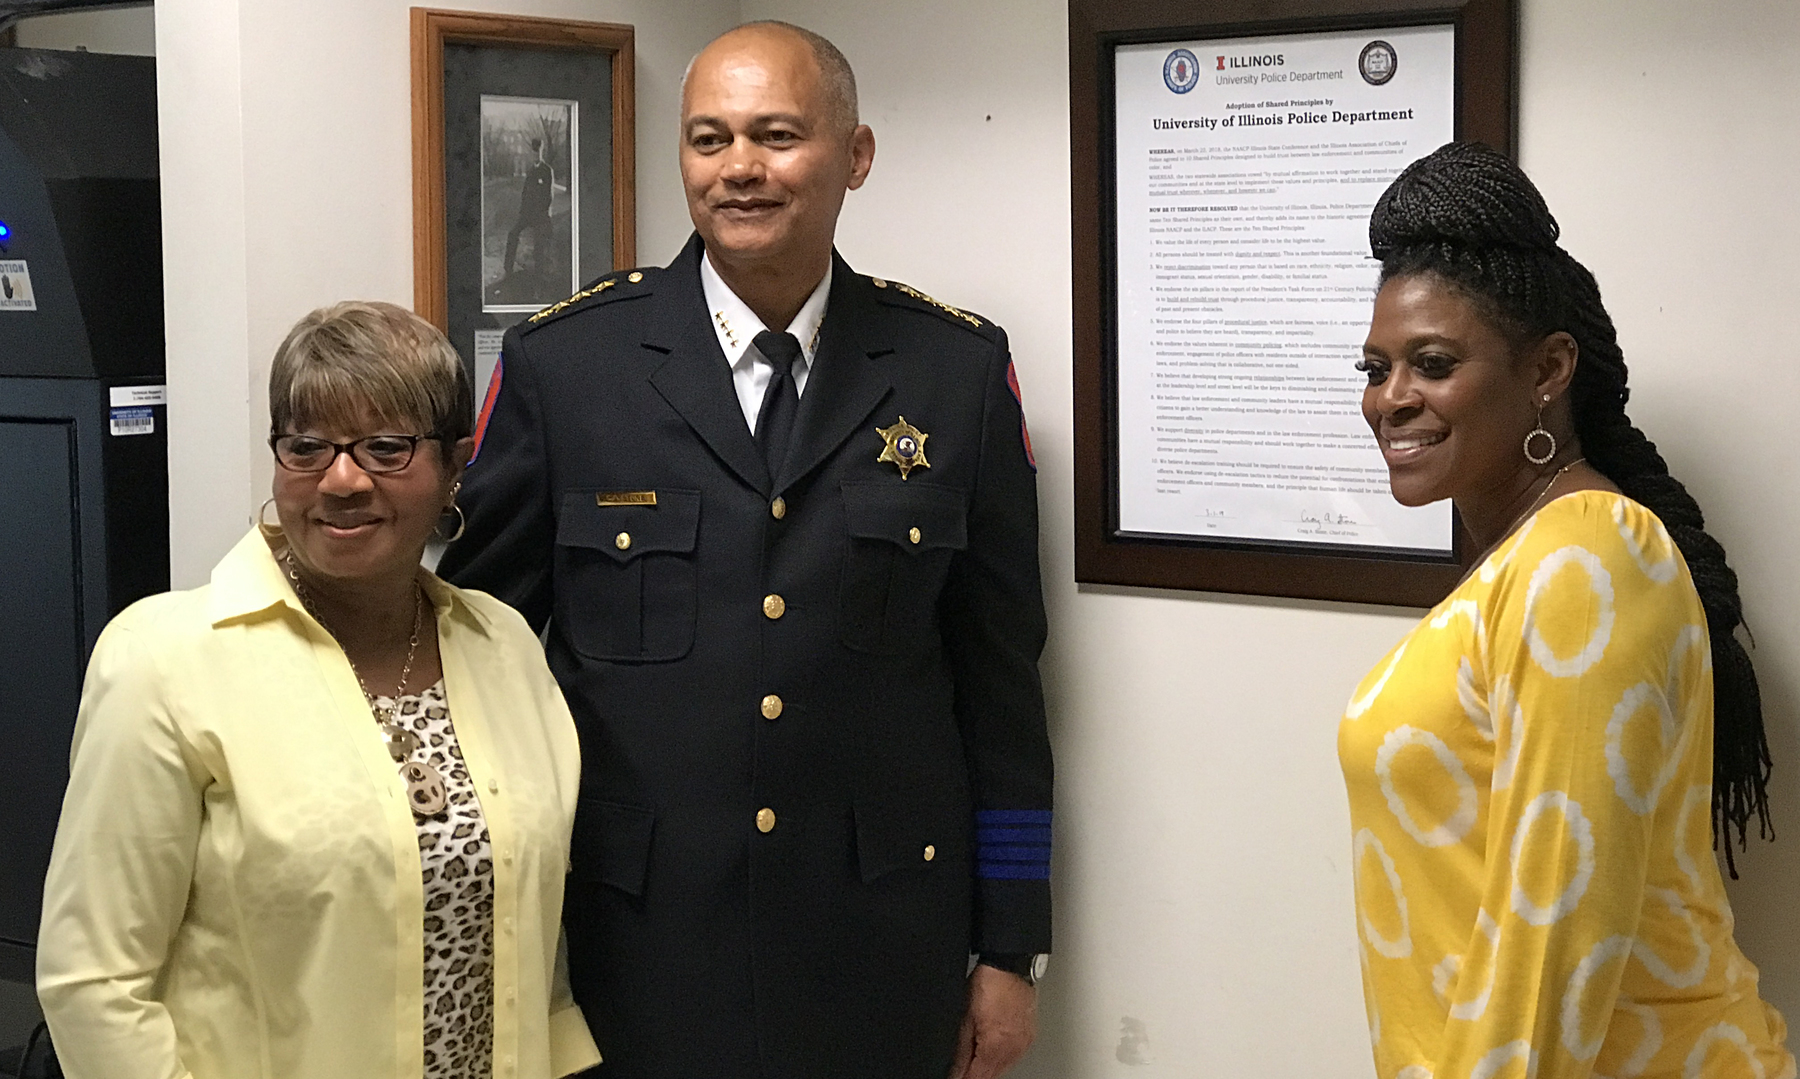 From left to right, NAACP Champaign County President Minnie Pearson, U. of I. Police Chief Craig Stone and state NAACP President Teresa Haley